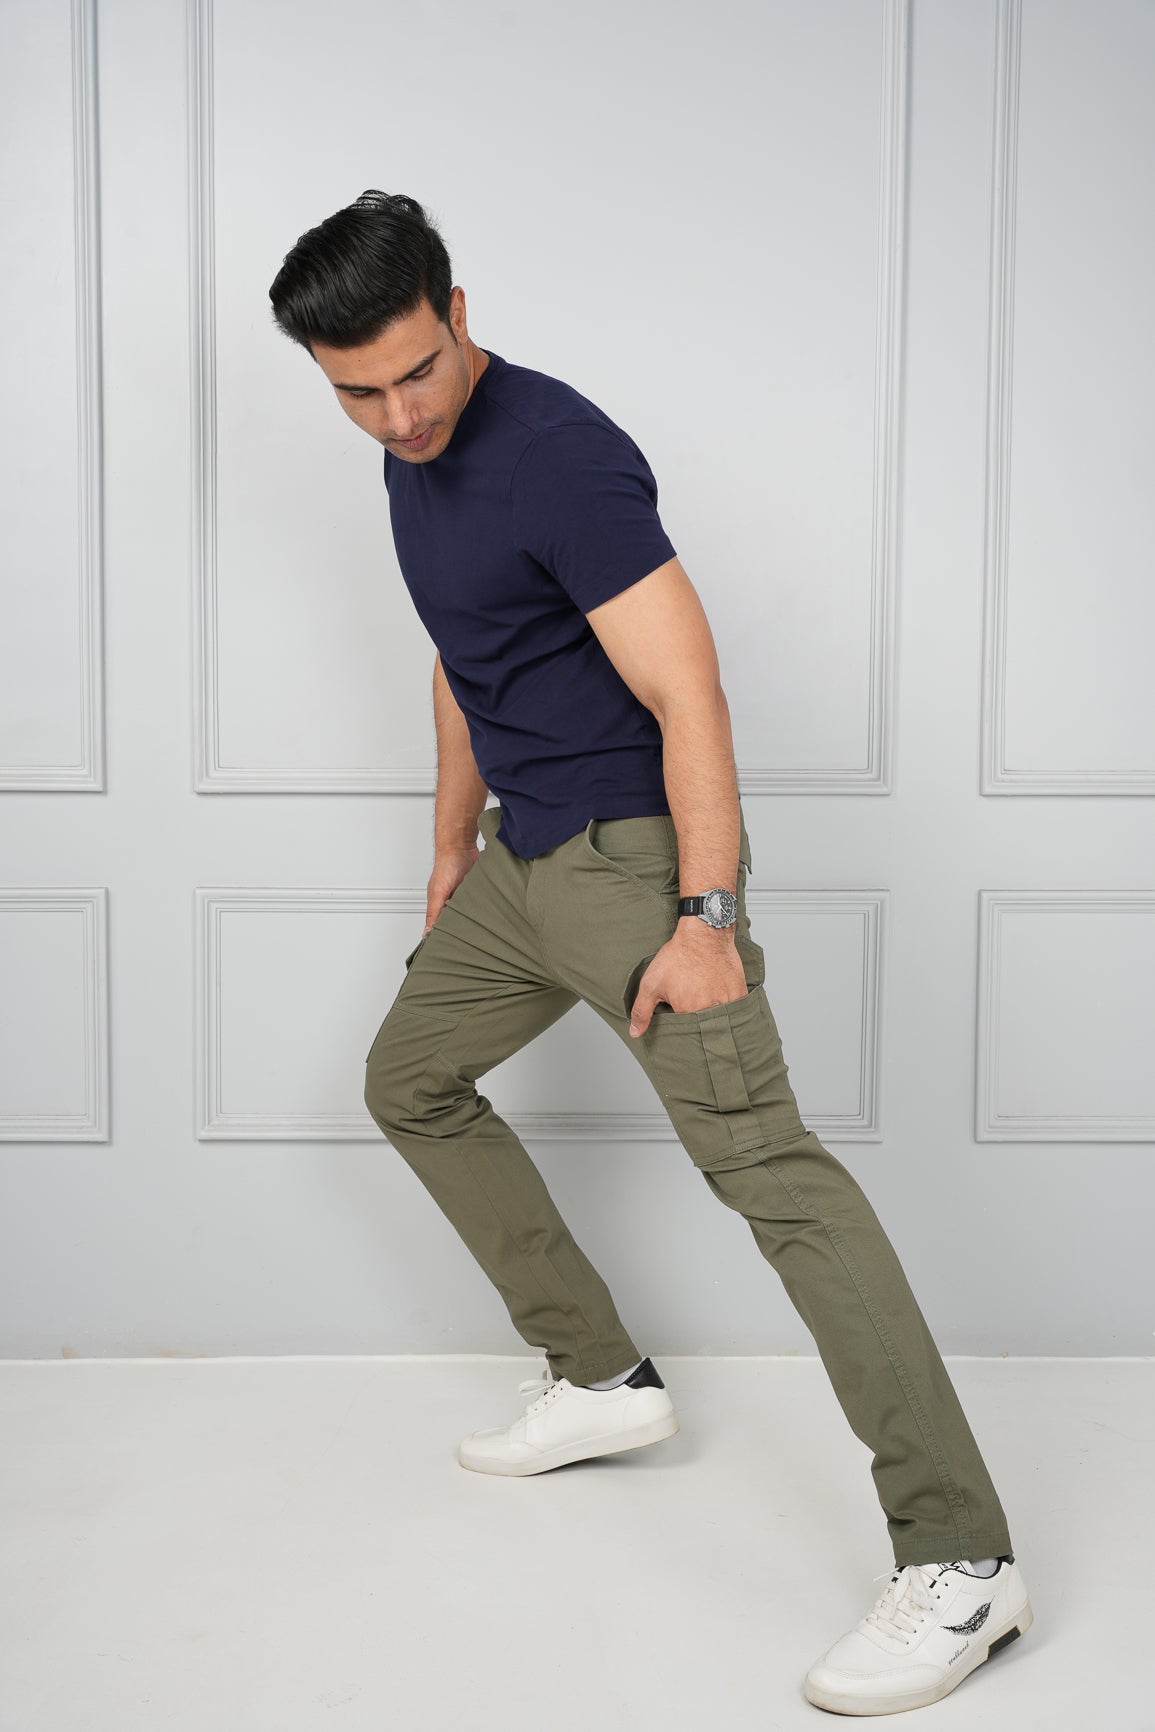 How to Style Olive Green Cargo Pants || Men's lookbook - YouTube